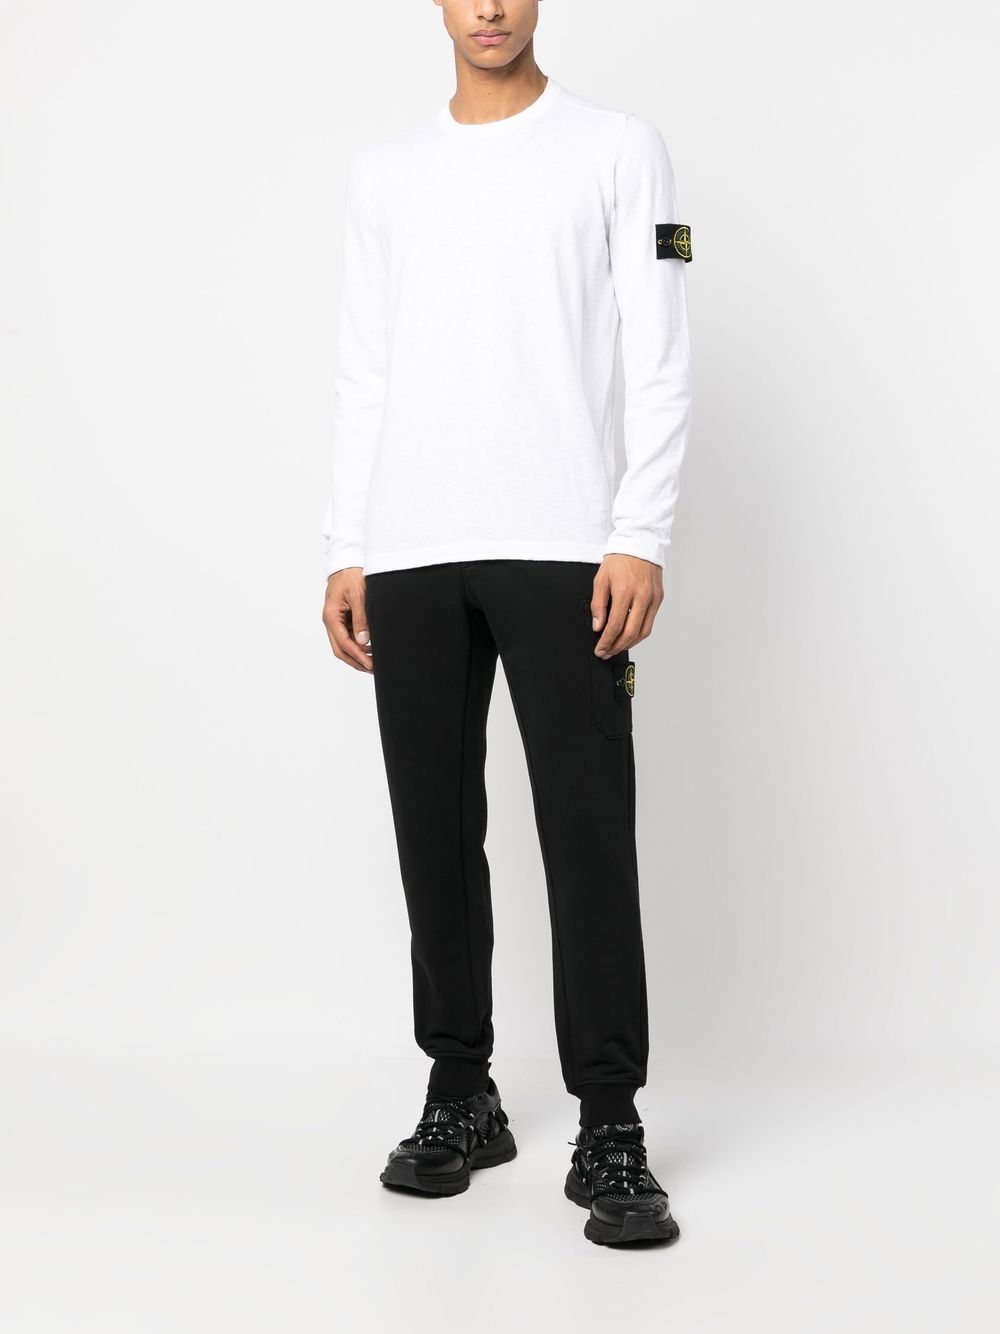 Stone Island Pull 502B0 White - Lothaire